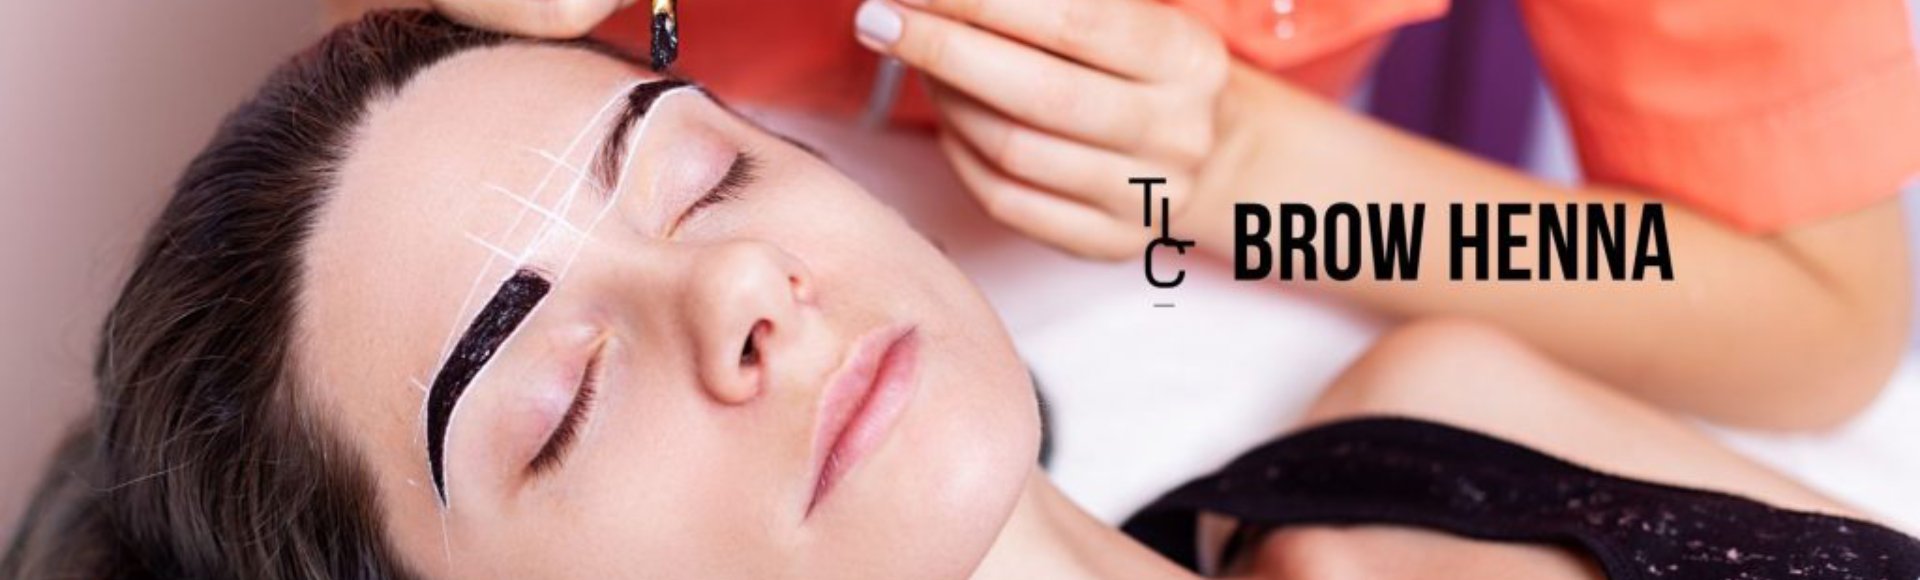 HENNA BROW  Day Spa Treatment  Packages Perth  Couple Spa Packages Perth